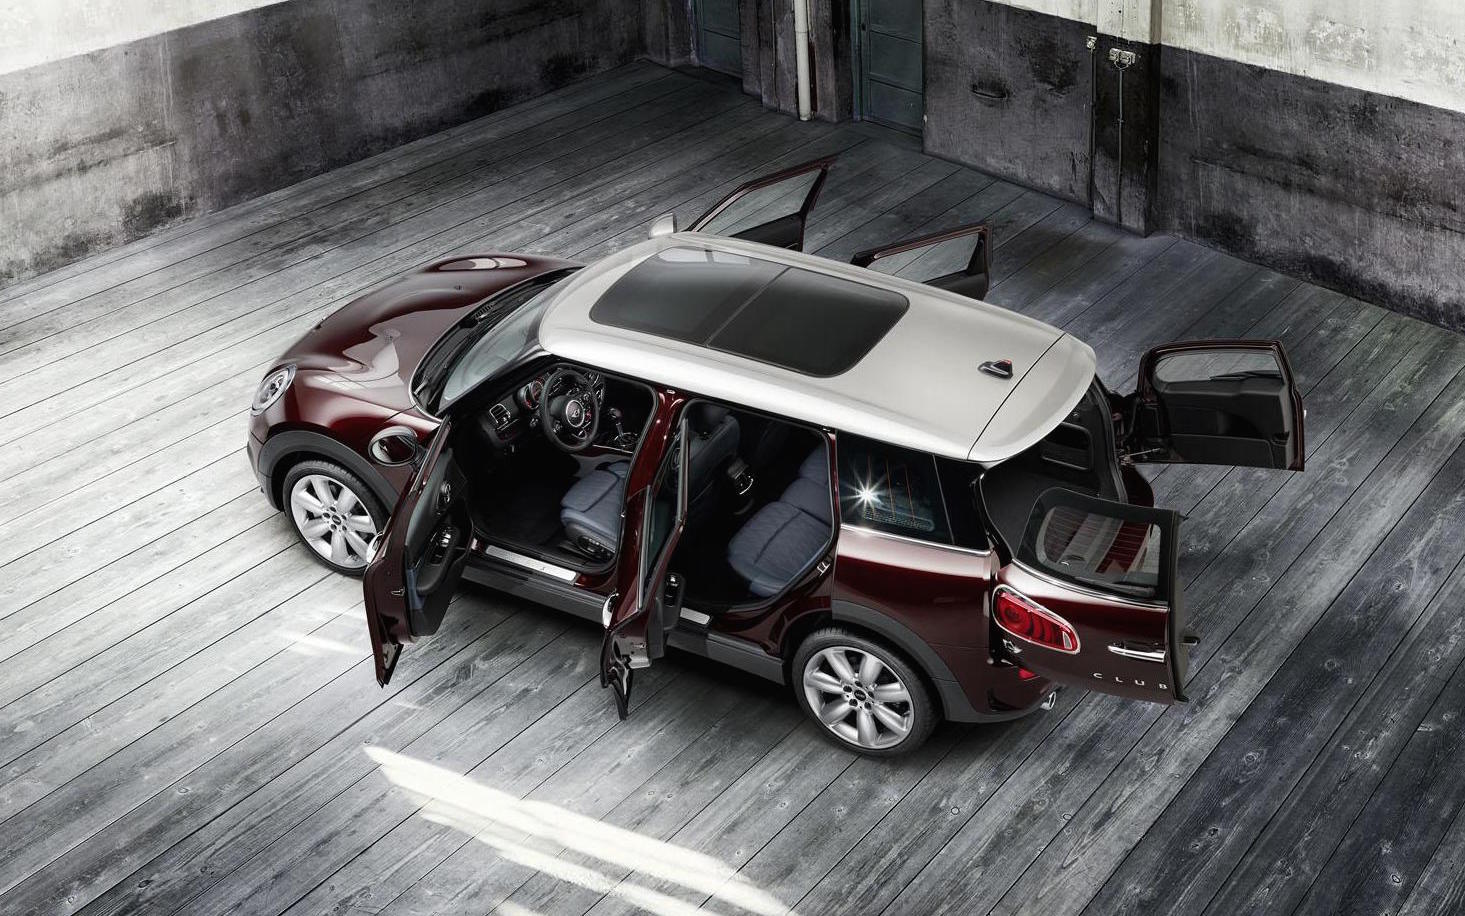 2016 MINI Clubman to go for upmarket approach, take on Audi A3